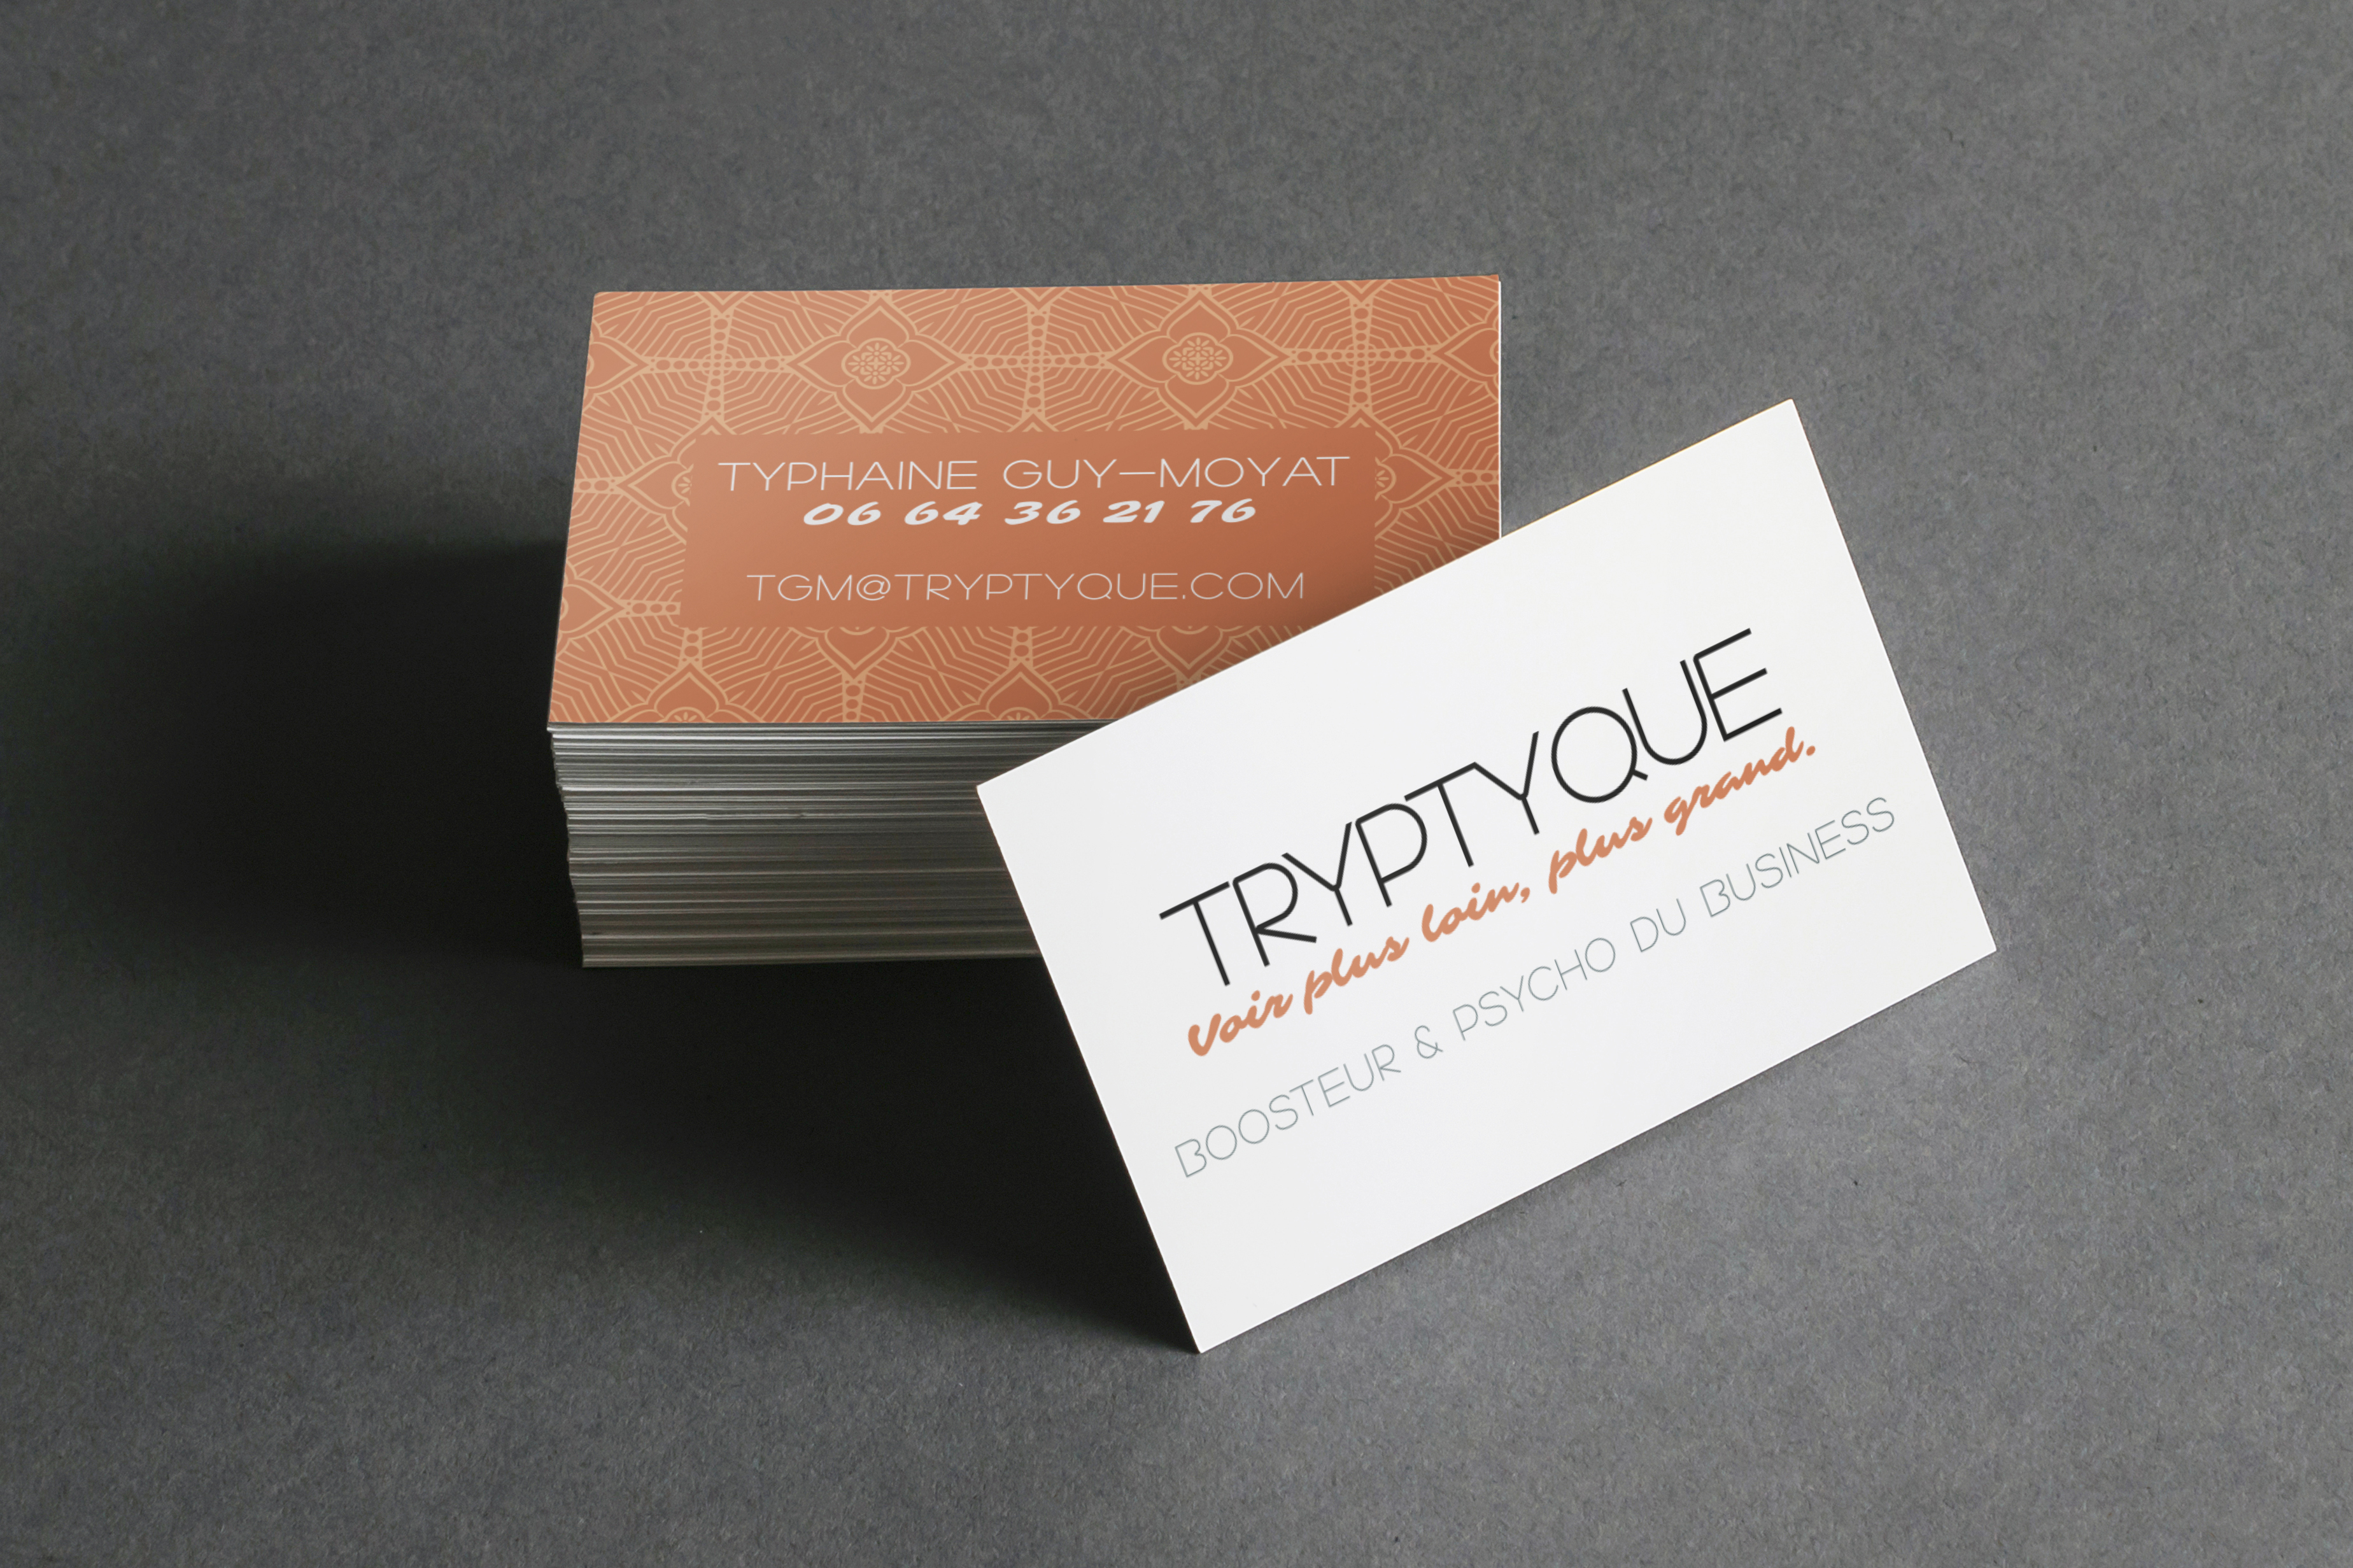 You are currently viewing tryptyque / Carte de visite